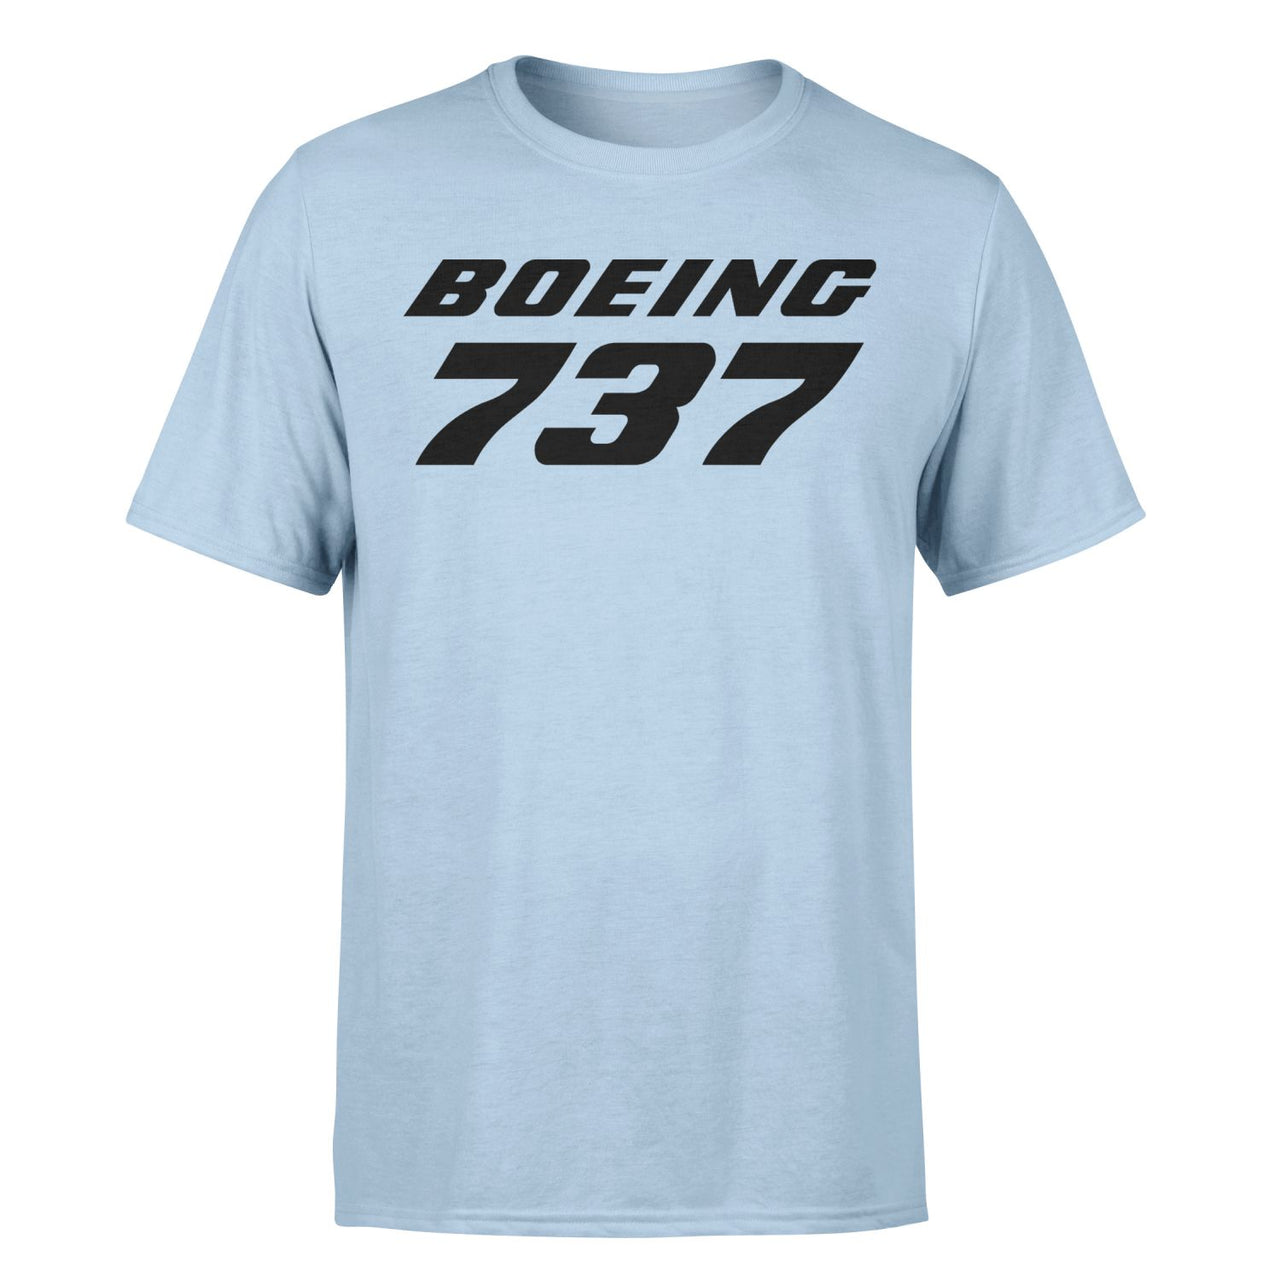 Boeing 737 & Text Designed T-Shirts